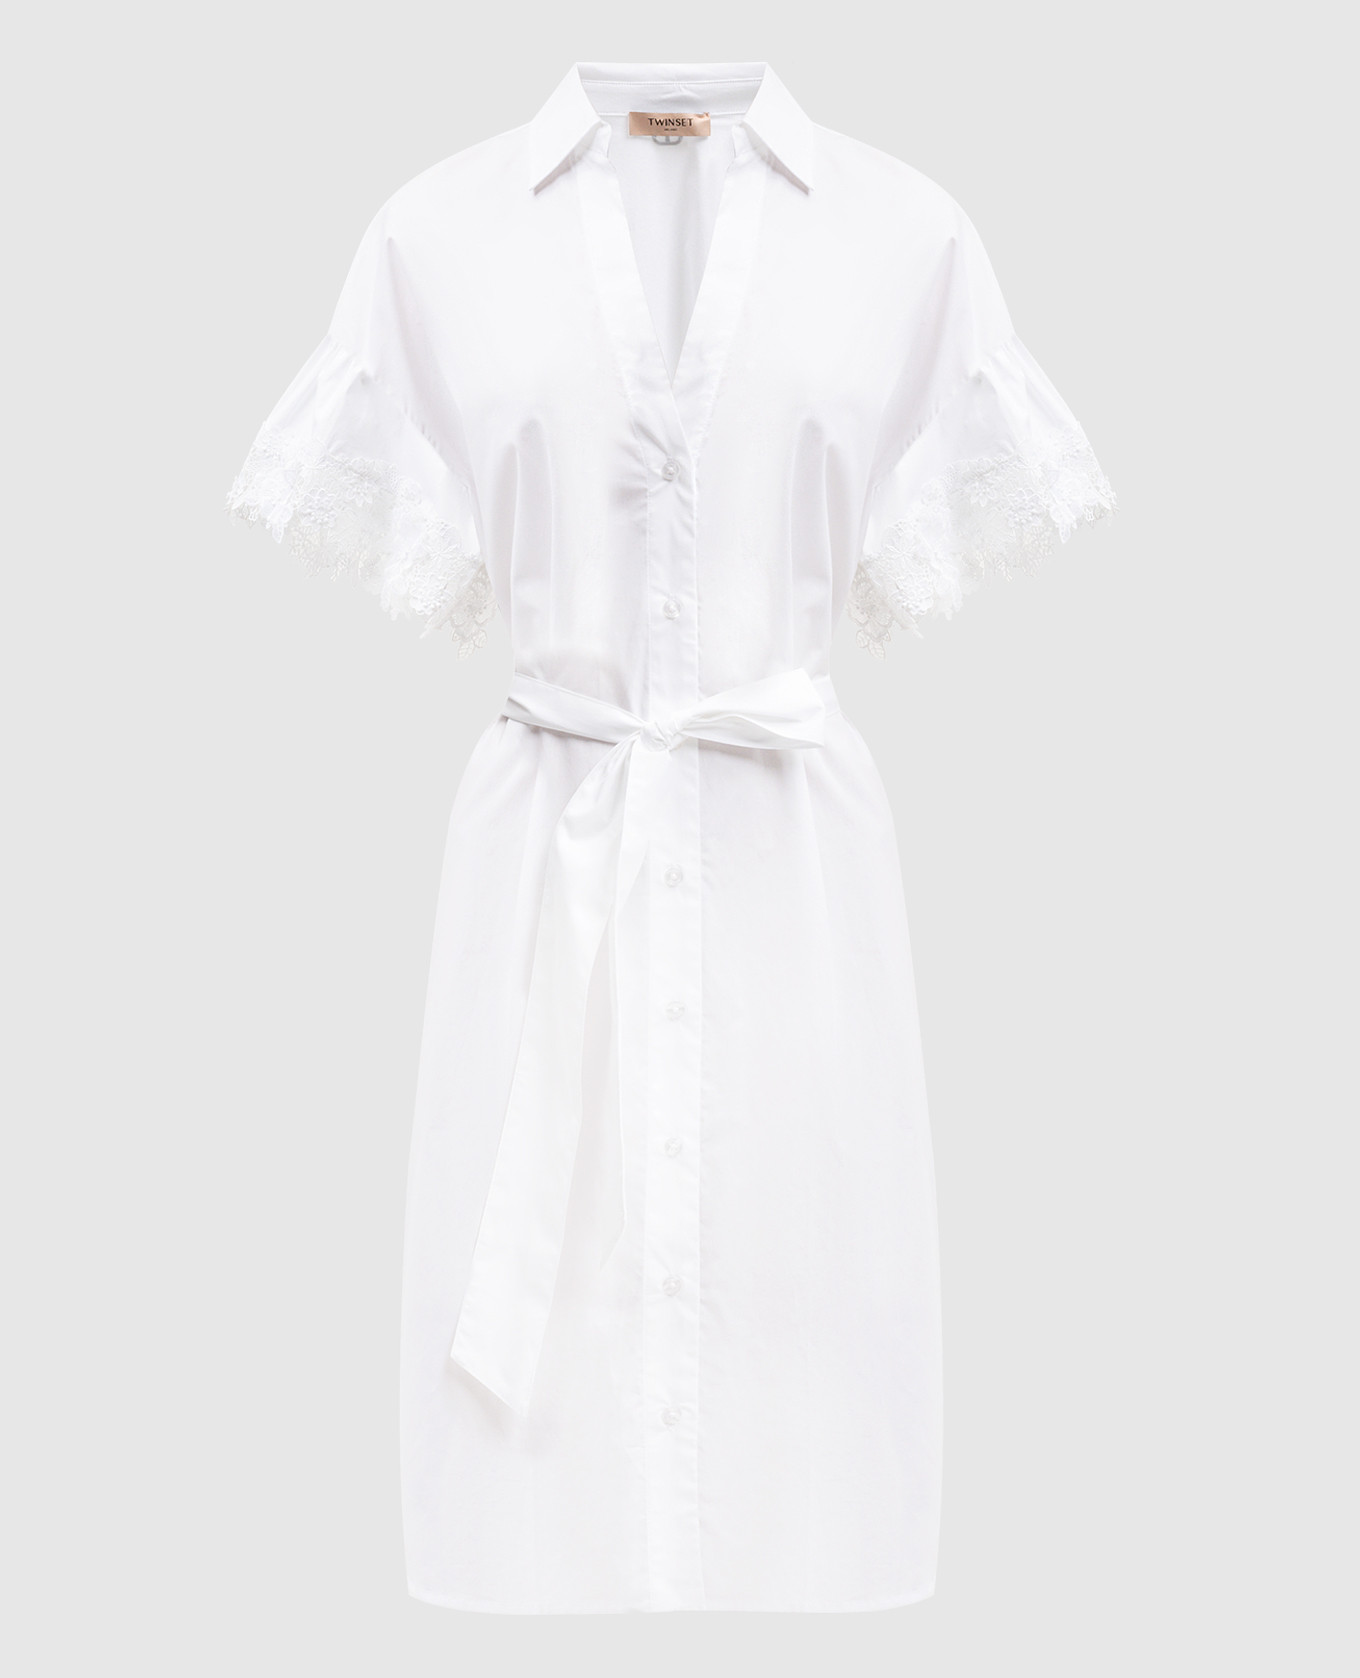 White shirt dress with lace in the form of flowers